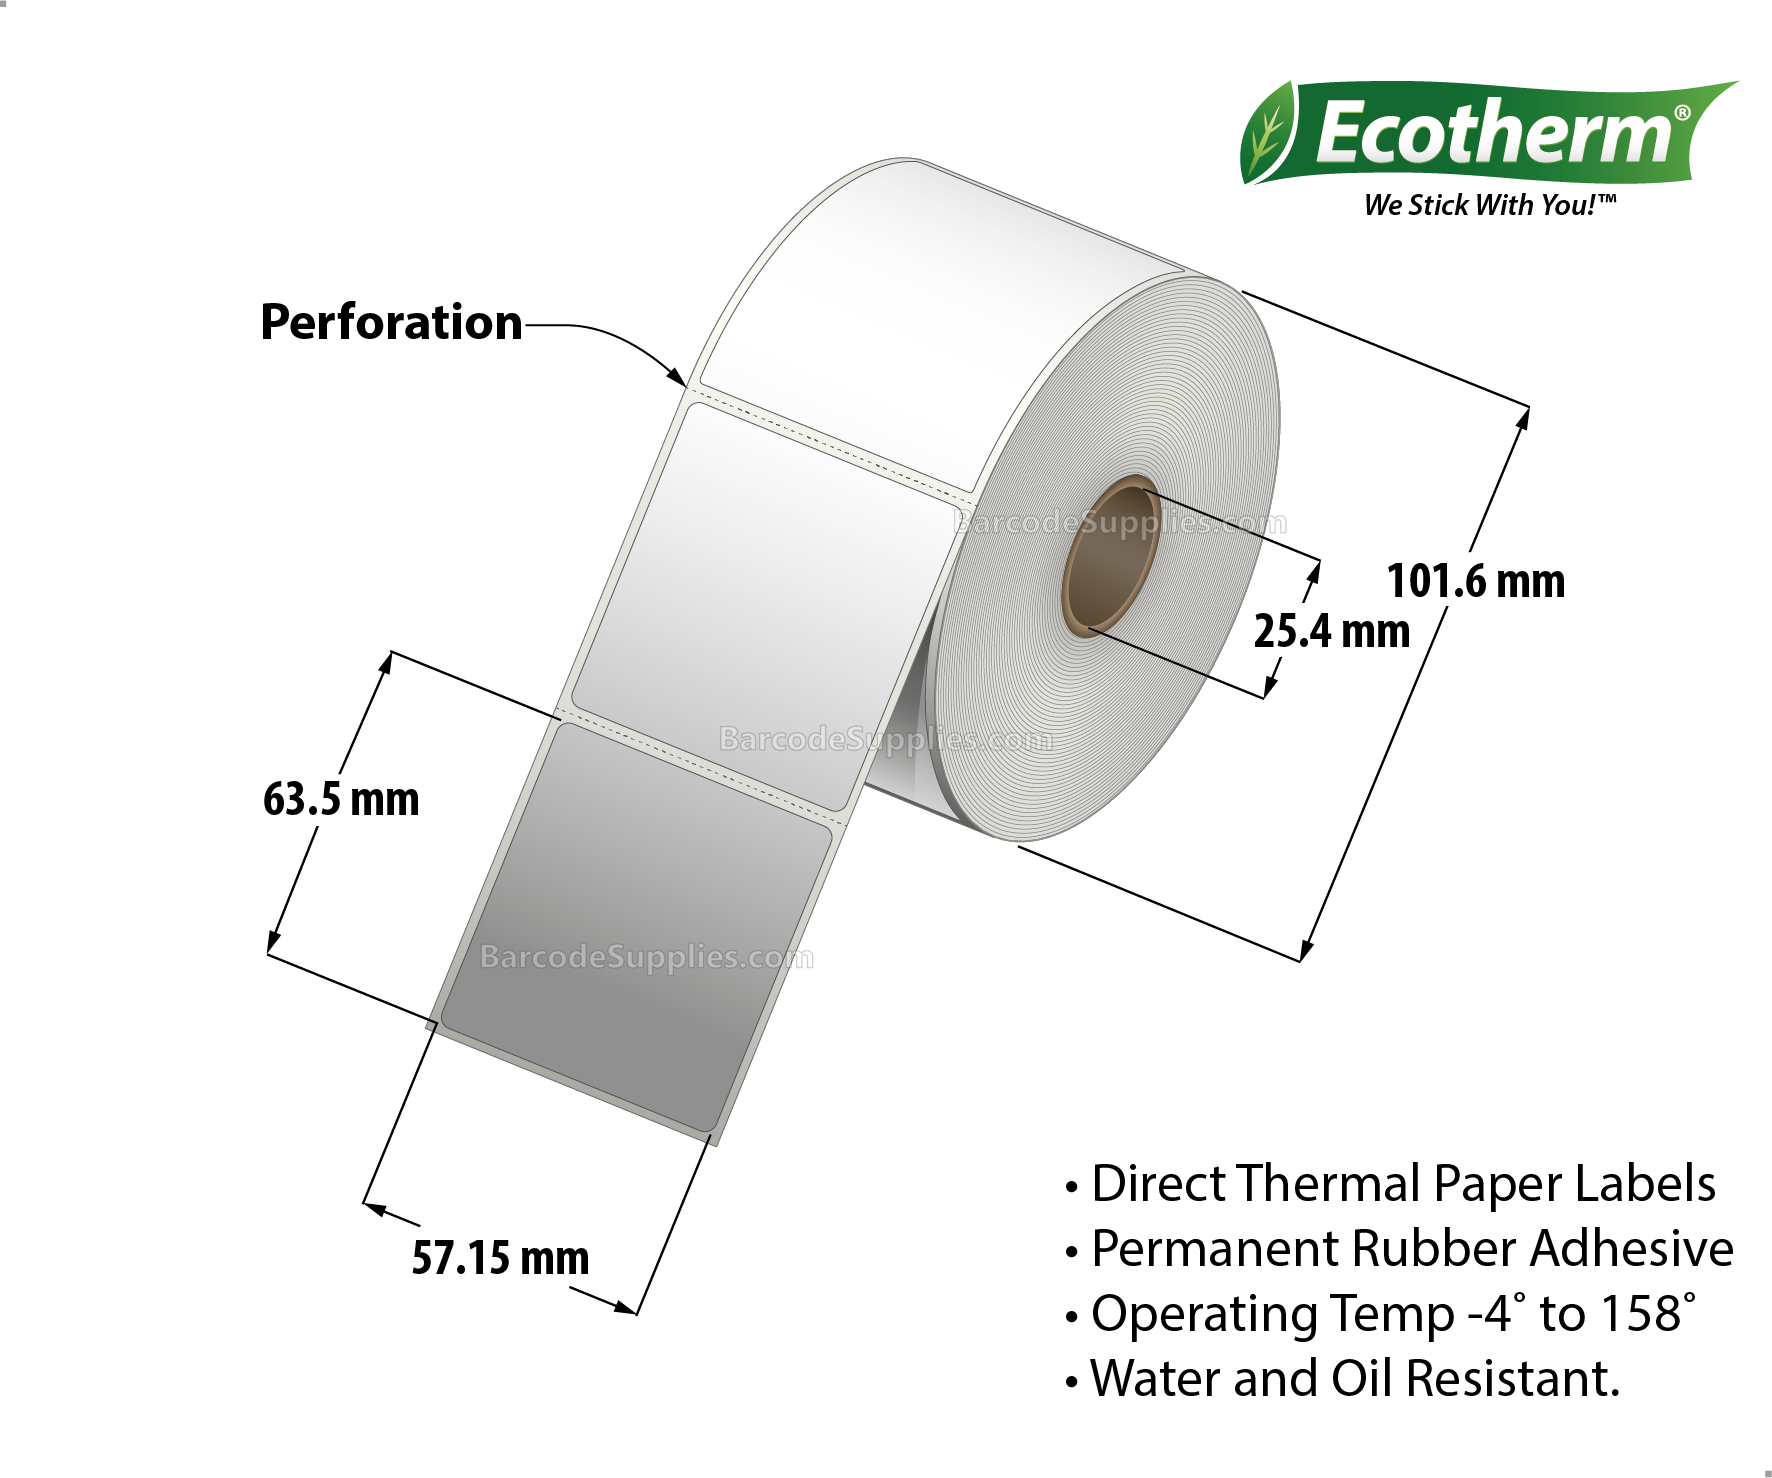 Products 2.25 x 2.5 Direct Thermal White Labels With Rubber Adhesive - Perforated - 600 Labels Per Roll - Carton Of 4 Rolls - 2400 Labels Total - MPN: ECOTHERM14135-4